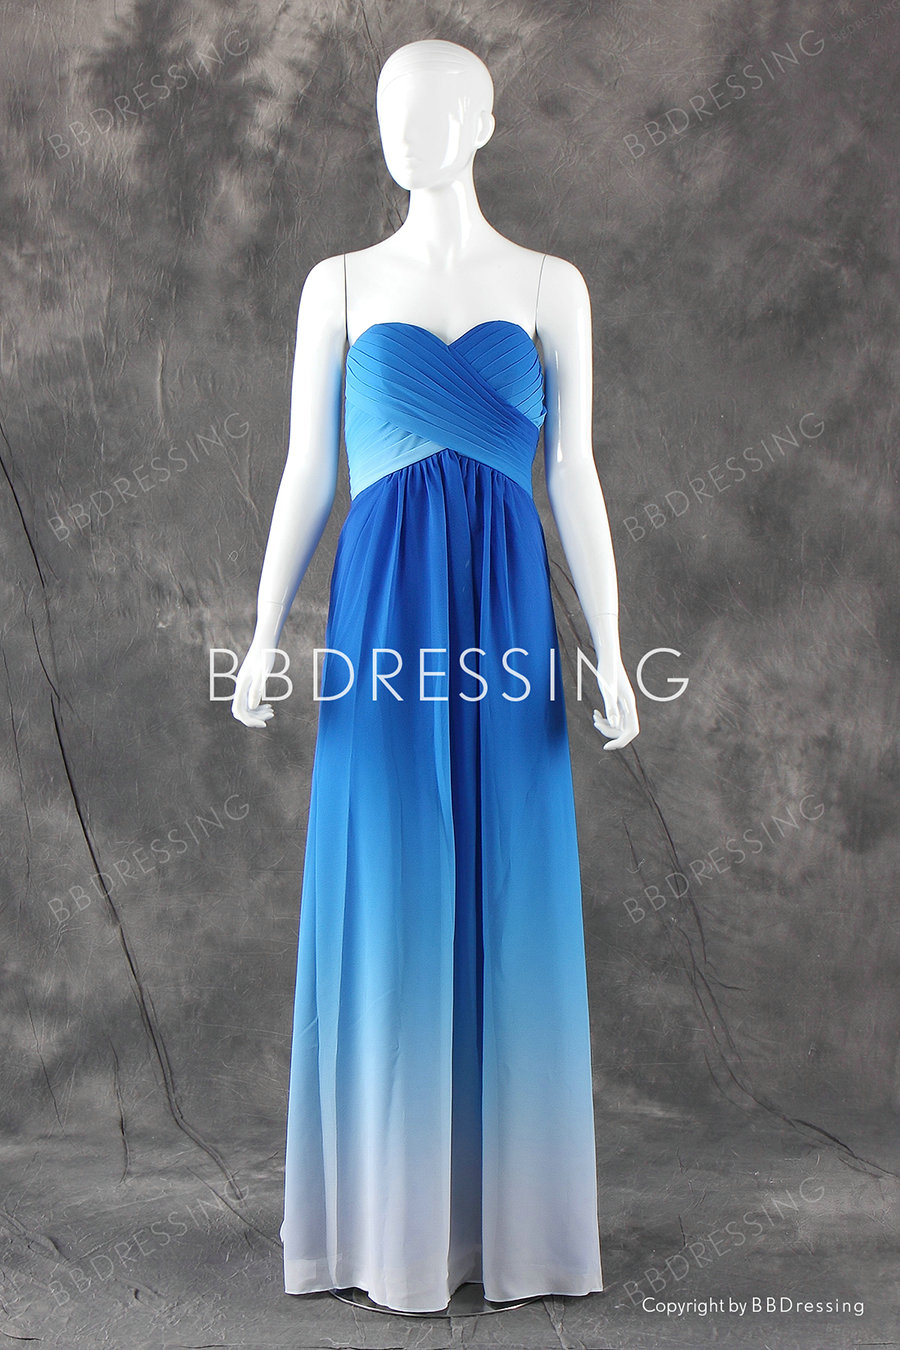 Gradient Sweetheart Chiffon Bridesmaid Dresses Floor Length Bb0002 From Bbdressing On Luulla 9197